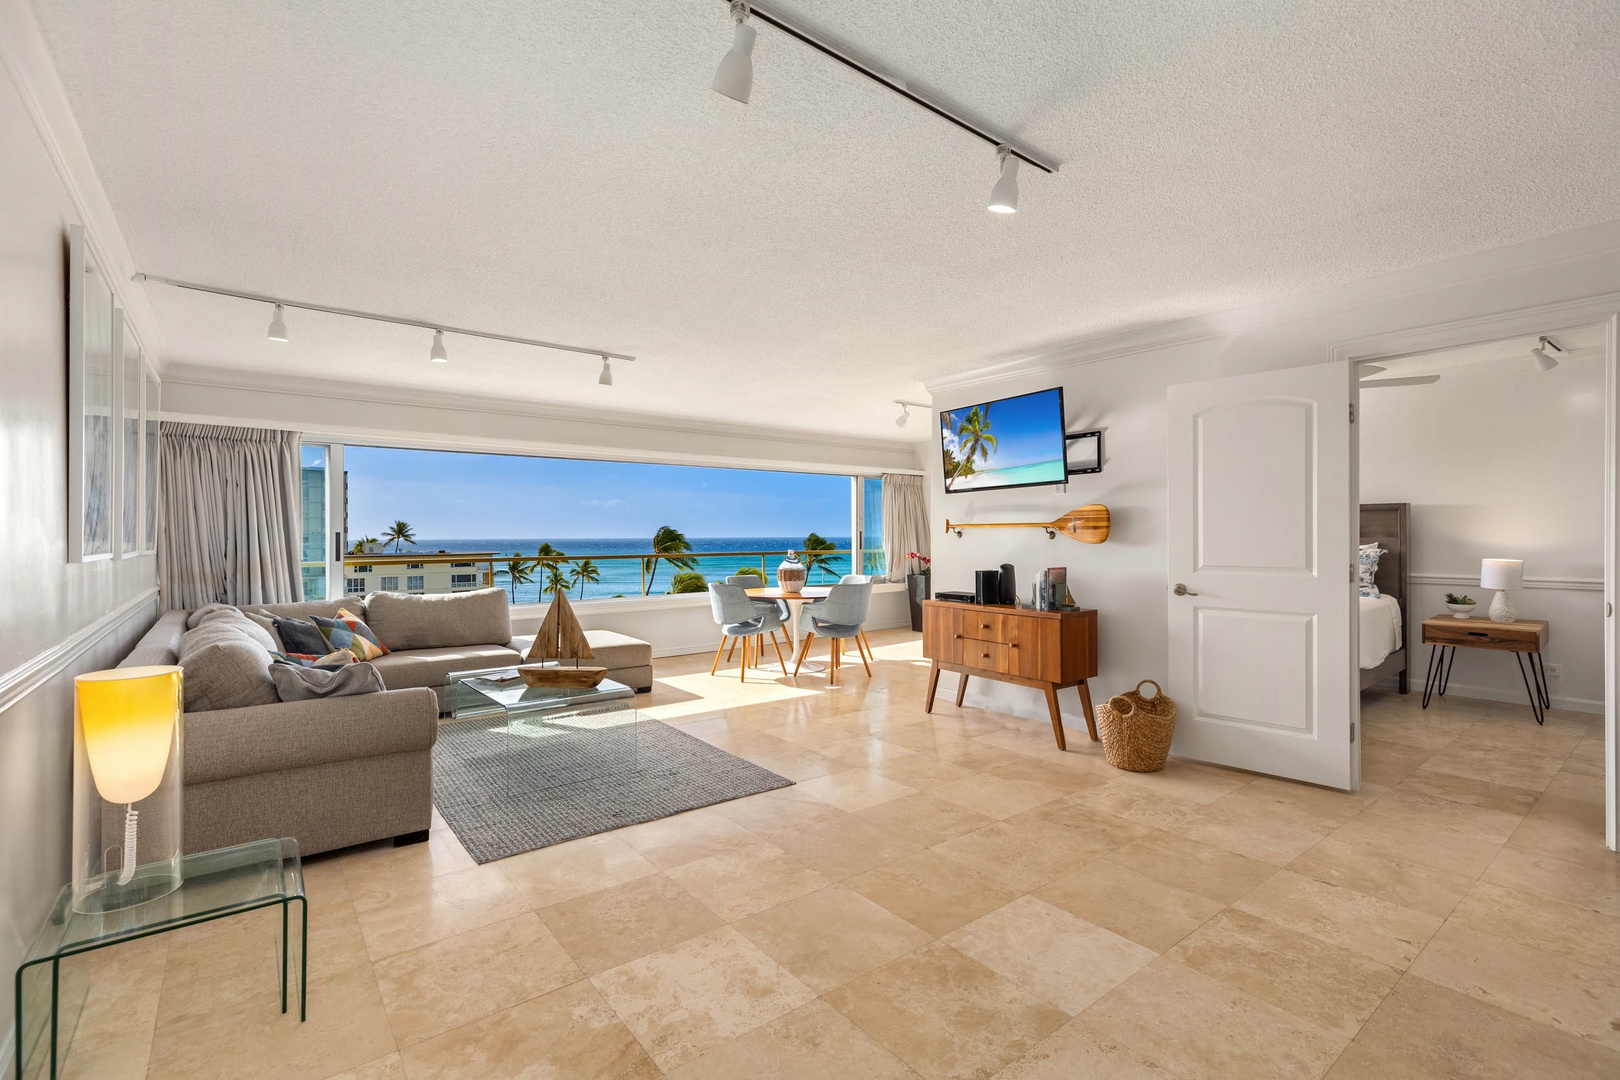 Honolulu Vacation Rentals, Colony Surf Getaway - Spacious and modern living area with seamless indoor-outdoor flow for a tranquil retreat.